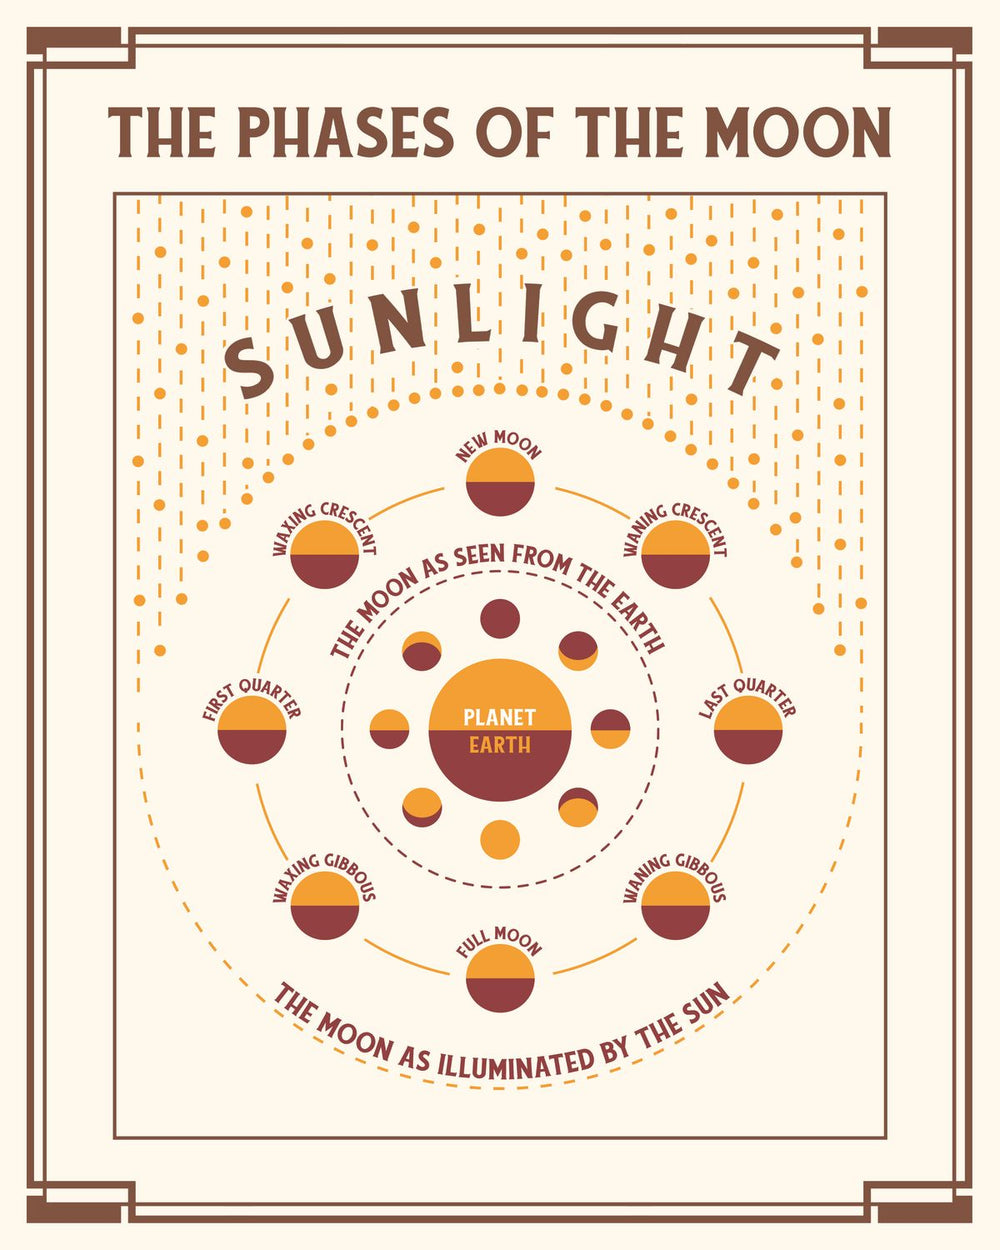 Sunlight And Moon Phases